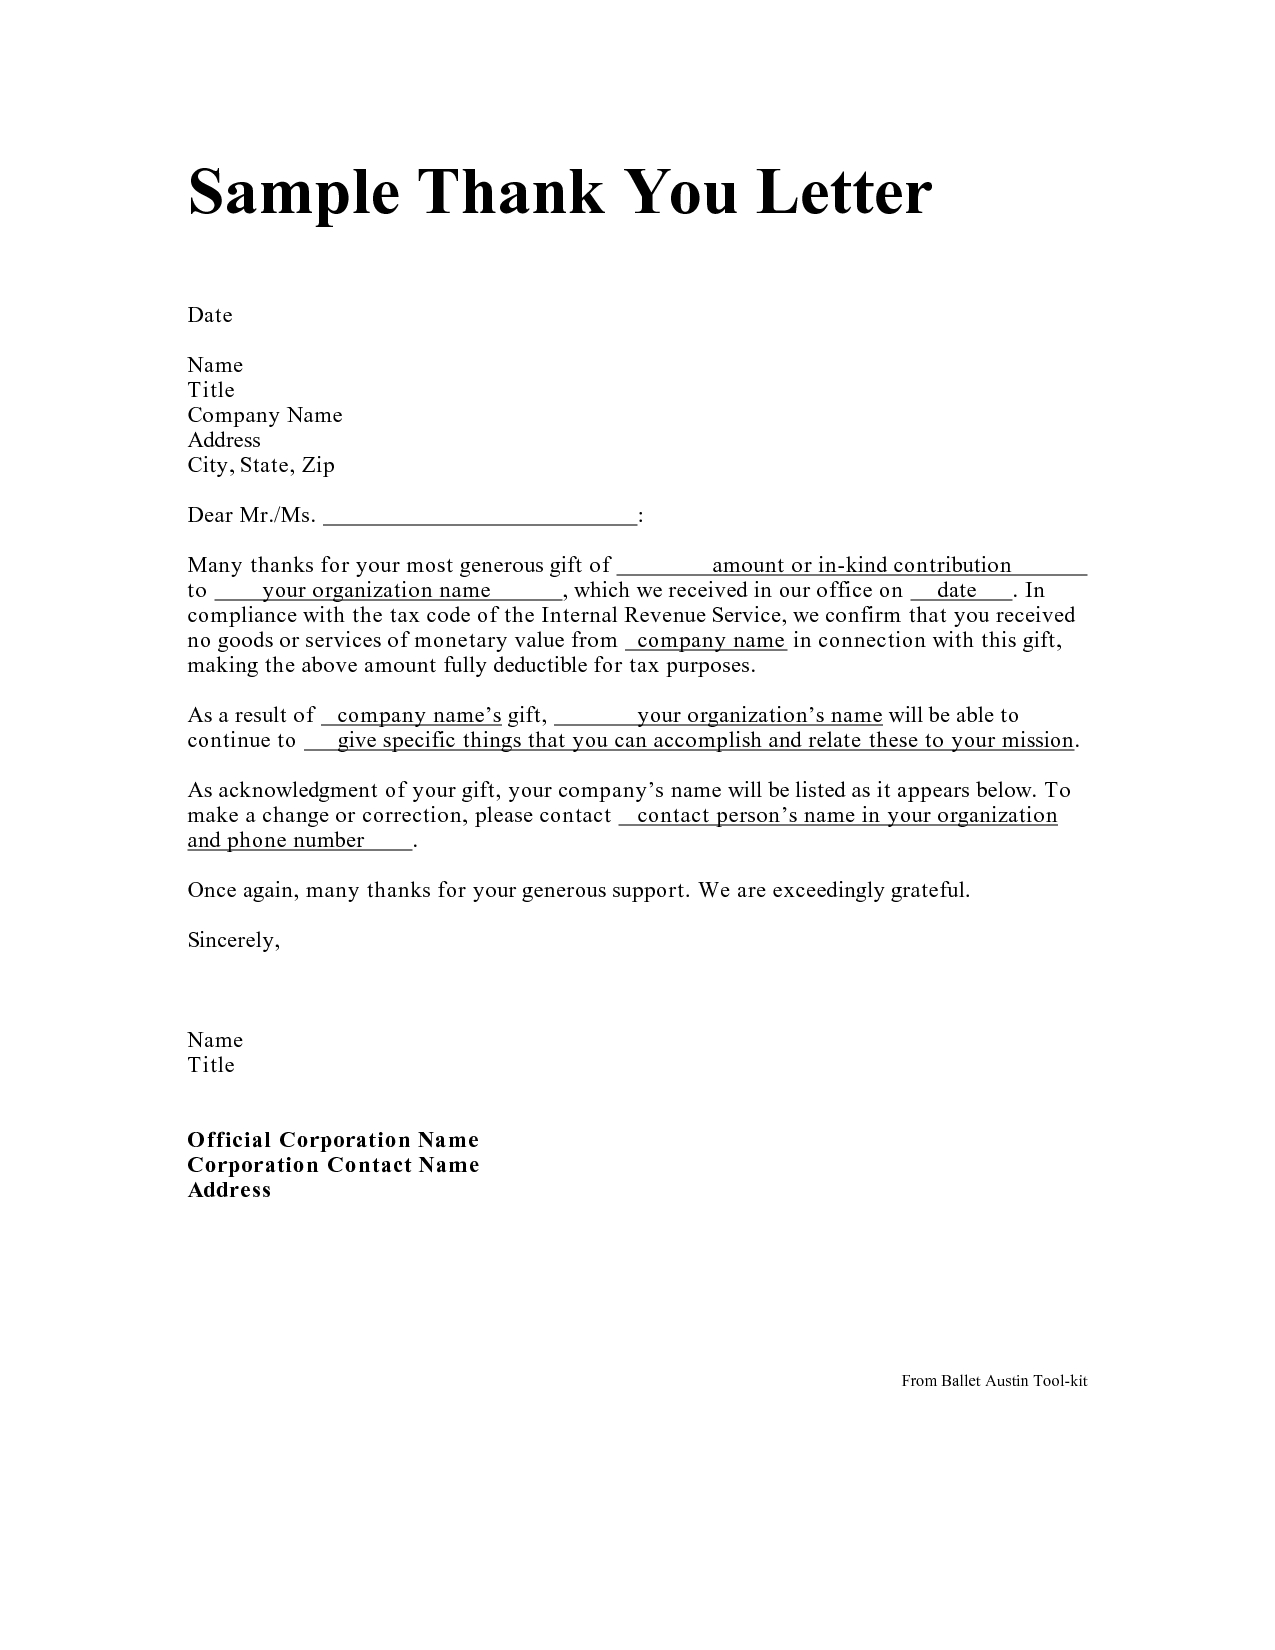 Sponsorship Letter Template - Personal Thank You Letter Personal Thank You Letter Samples